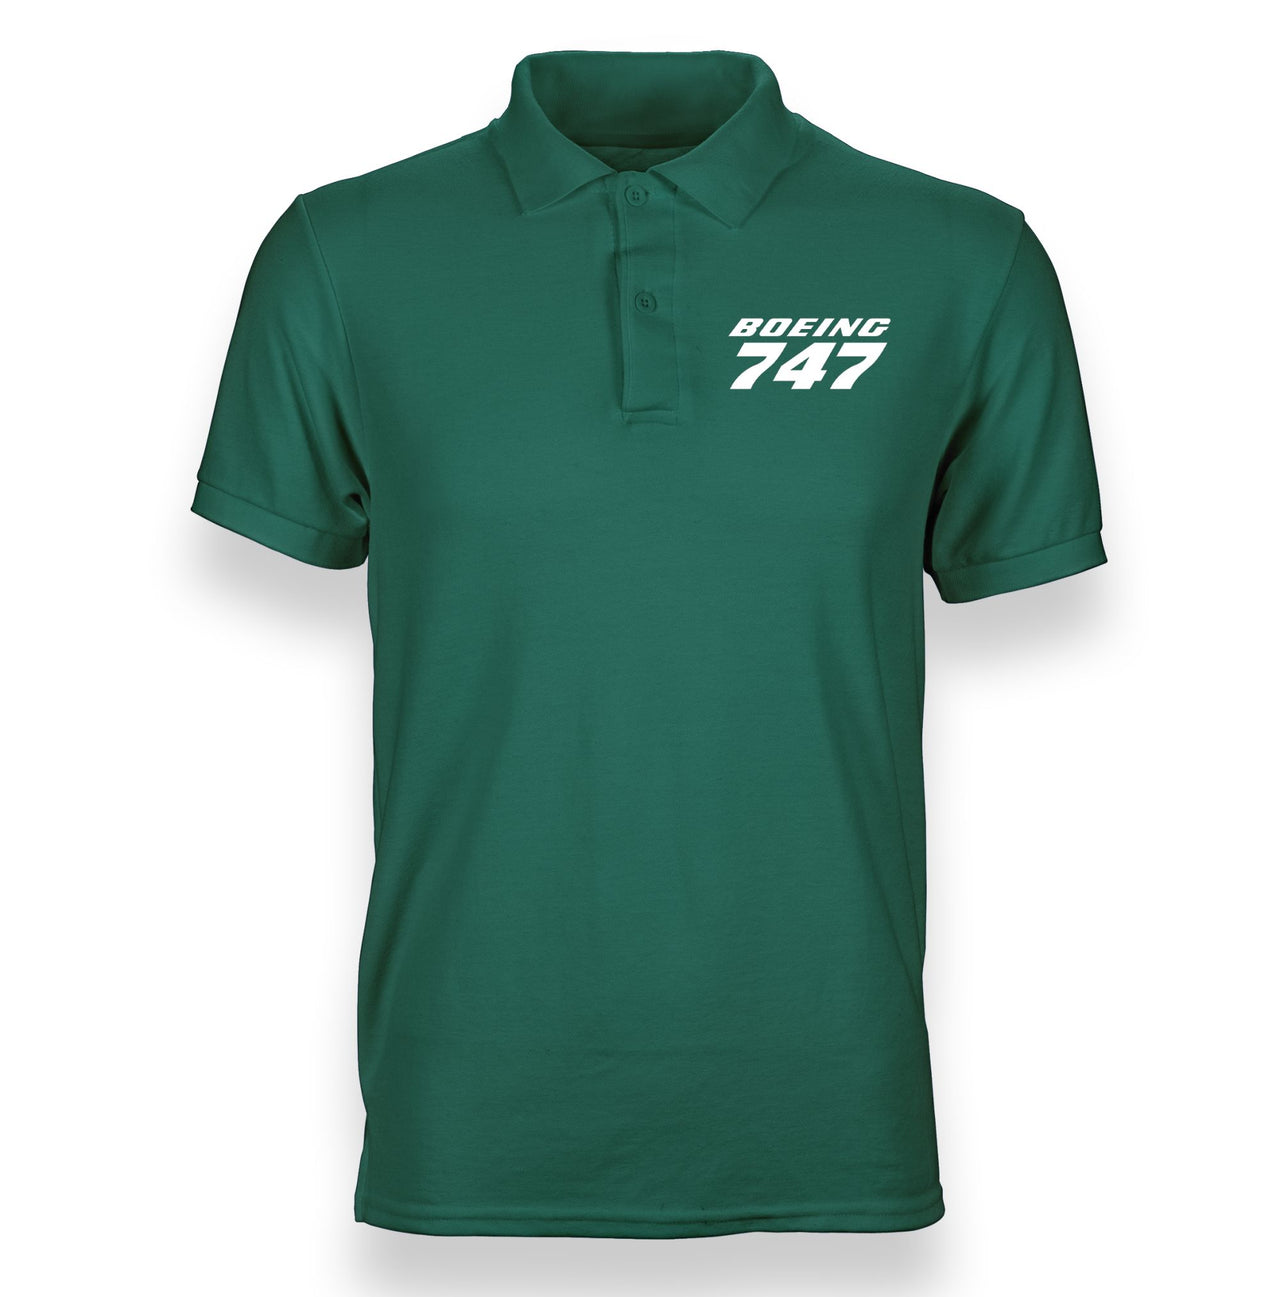 Boeing 747 & Text Designed "WOMEN" Polo T-Shirts